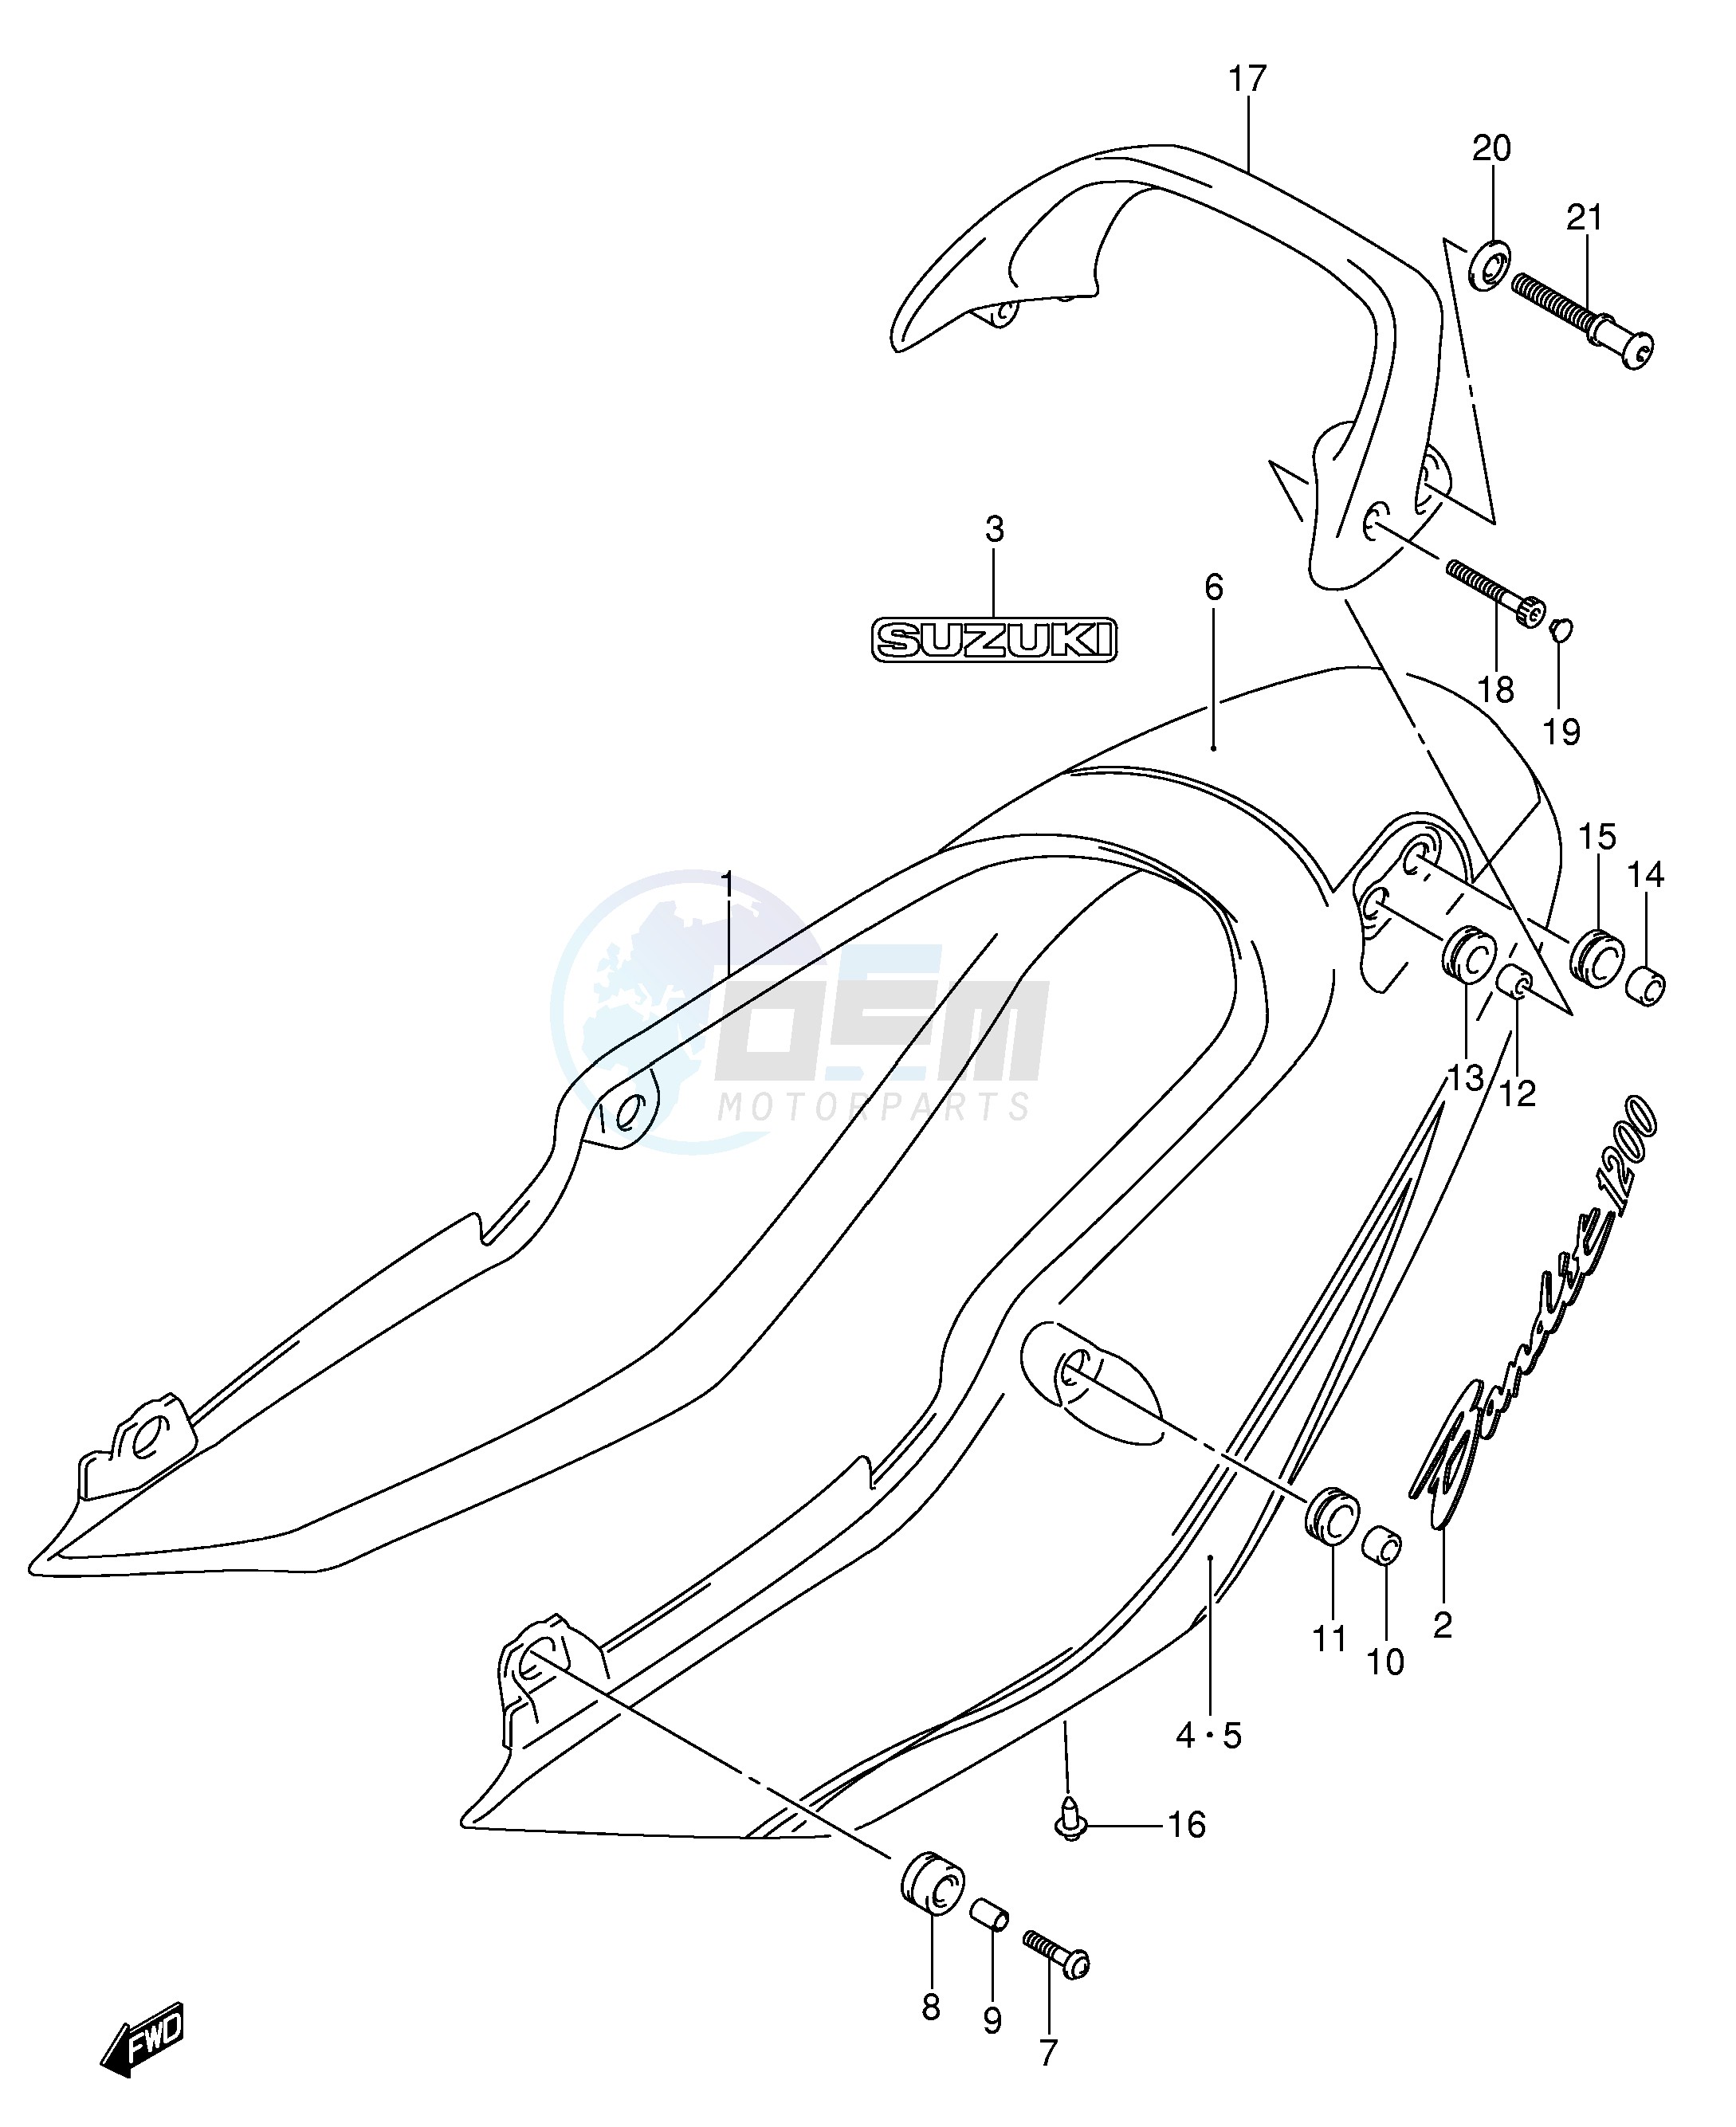 SEAT TAIL COVER (GSF1200ZK4) blueprint